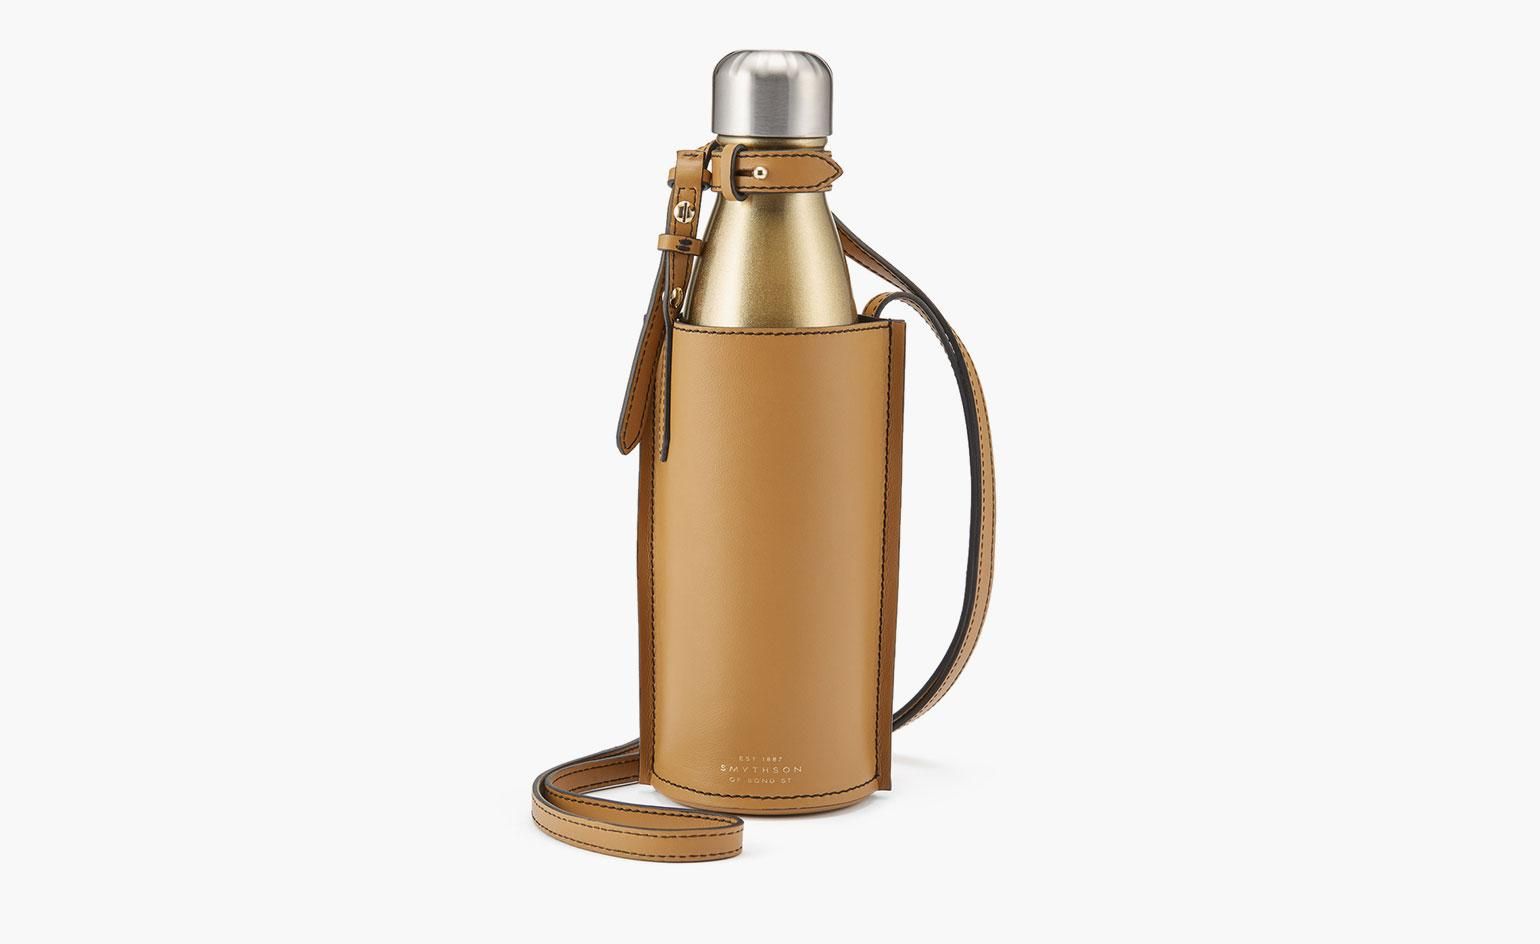 The best in sustainable (and stylish) water bottle design. Wallpaper*